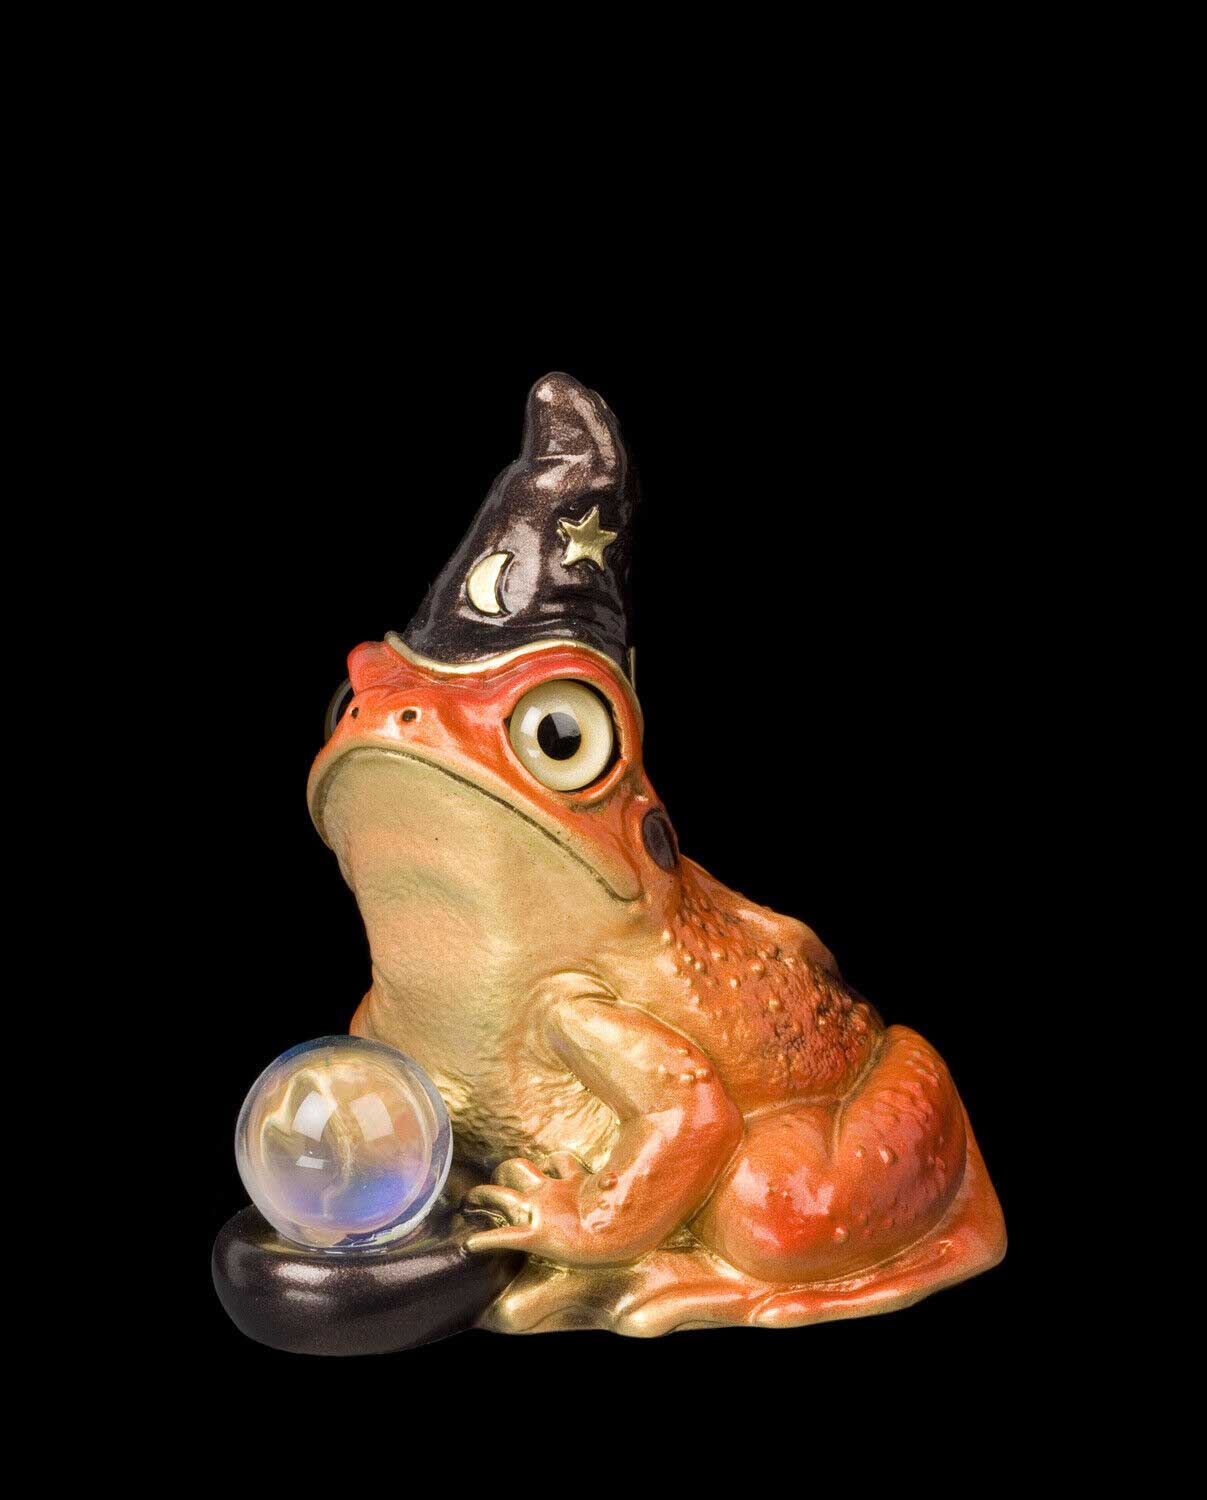 20220806-Twilight-Citrine-Frog-Wizard-Test-Paint-1-by-Gina